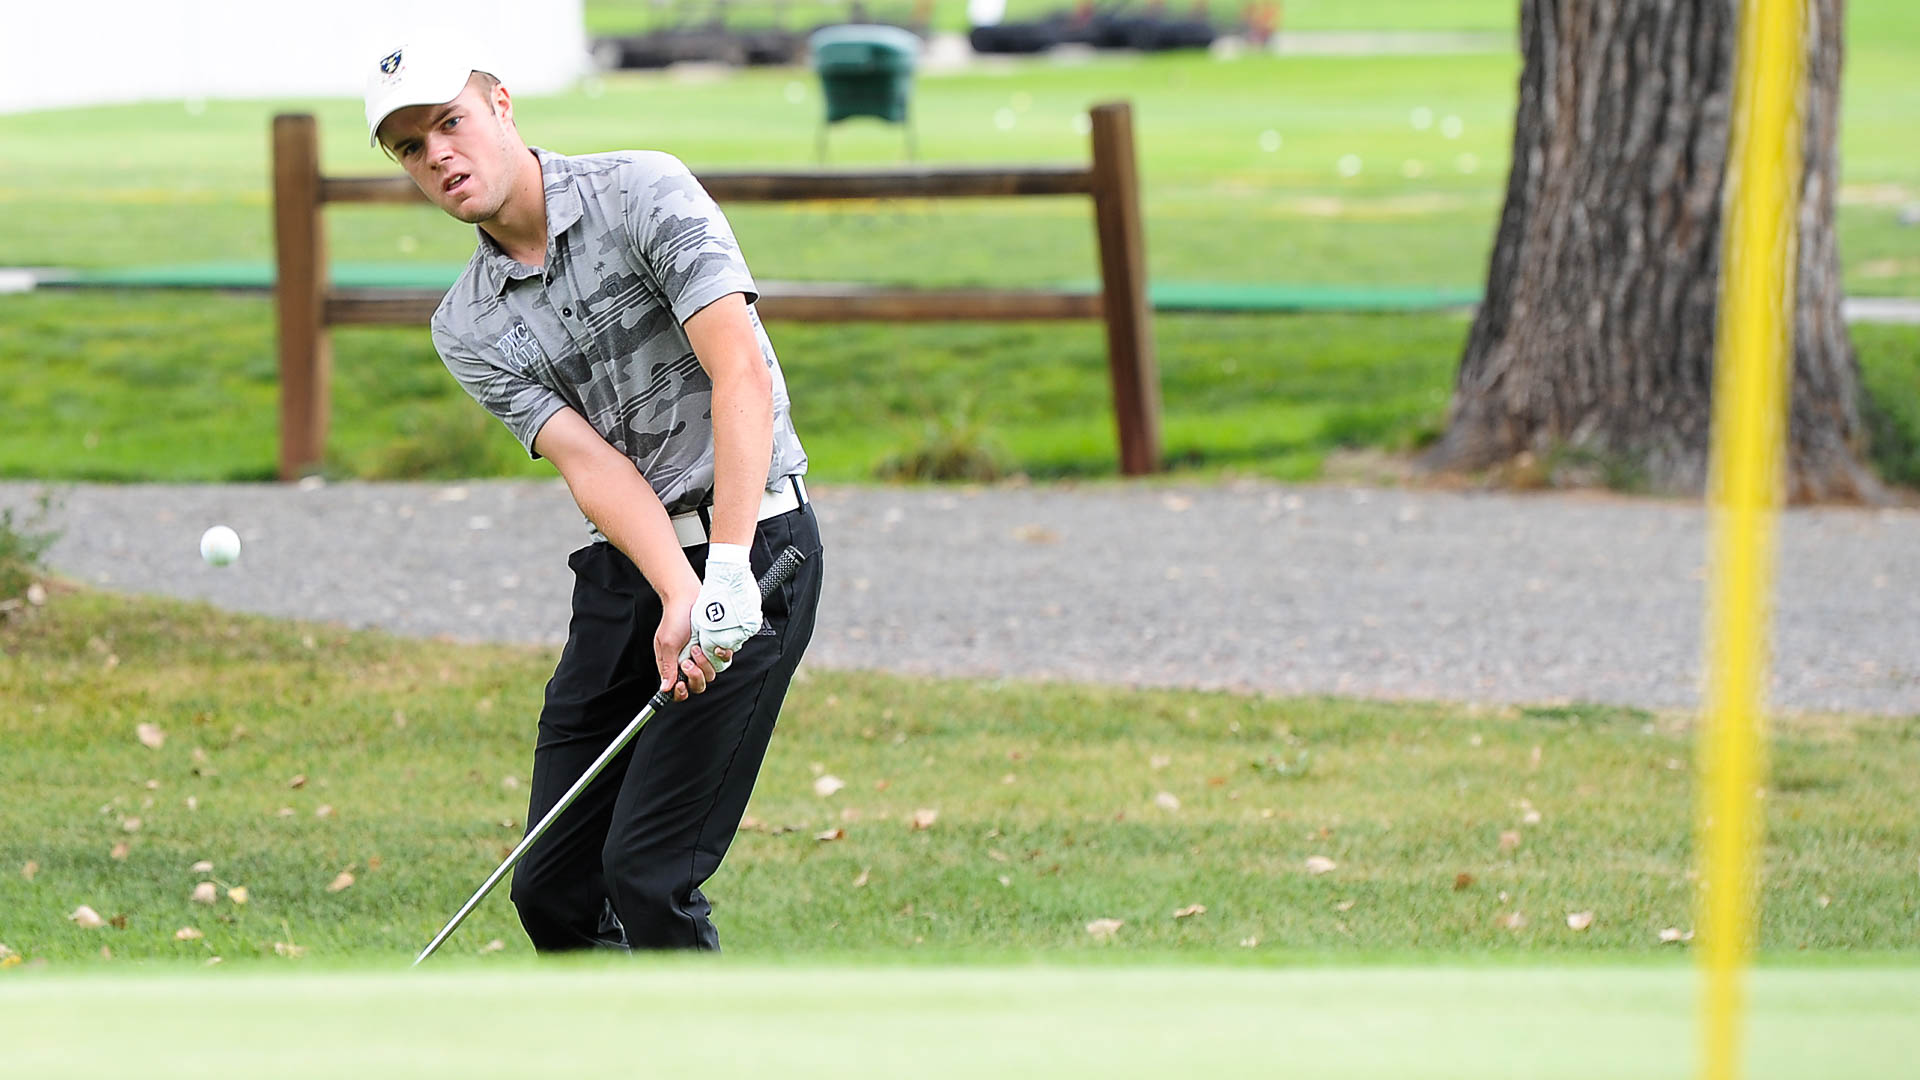  Eastern Wyoming College’s Oscar Behle hits the ball onto the green Thursday during the Regional IX Golf Tournament Thursday, Sept. 15 at Cottonwood Golf Course in Torrington, Wyoming. Behle finished in third place with a -2.